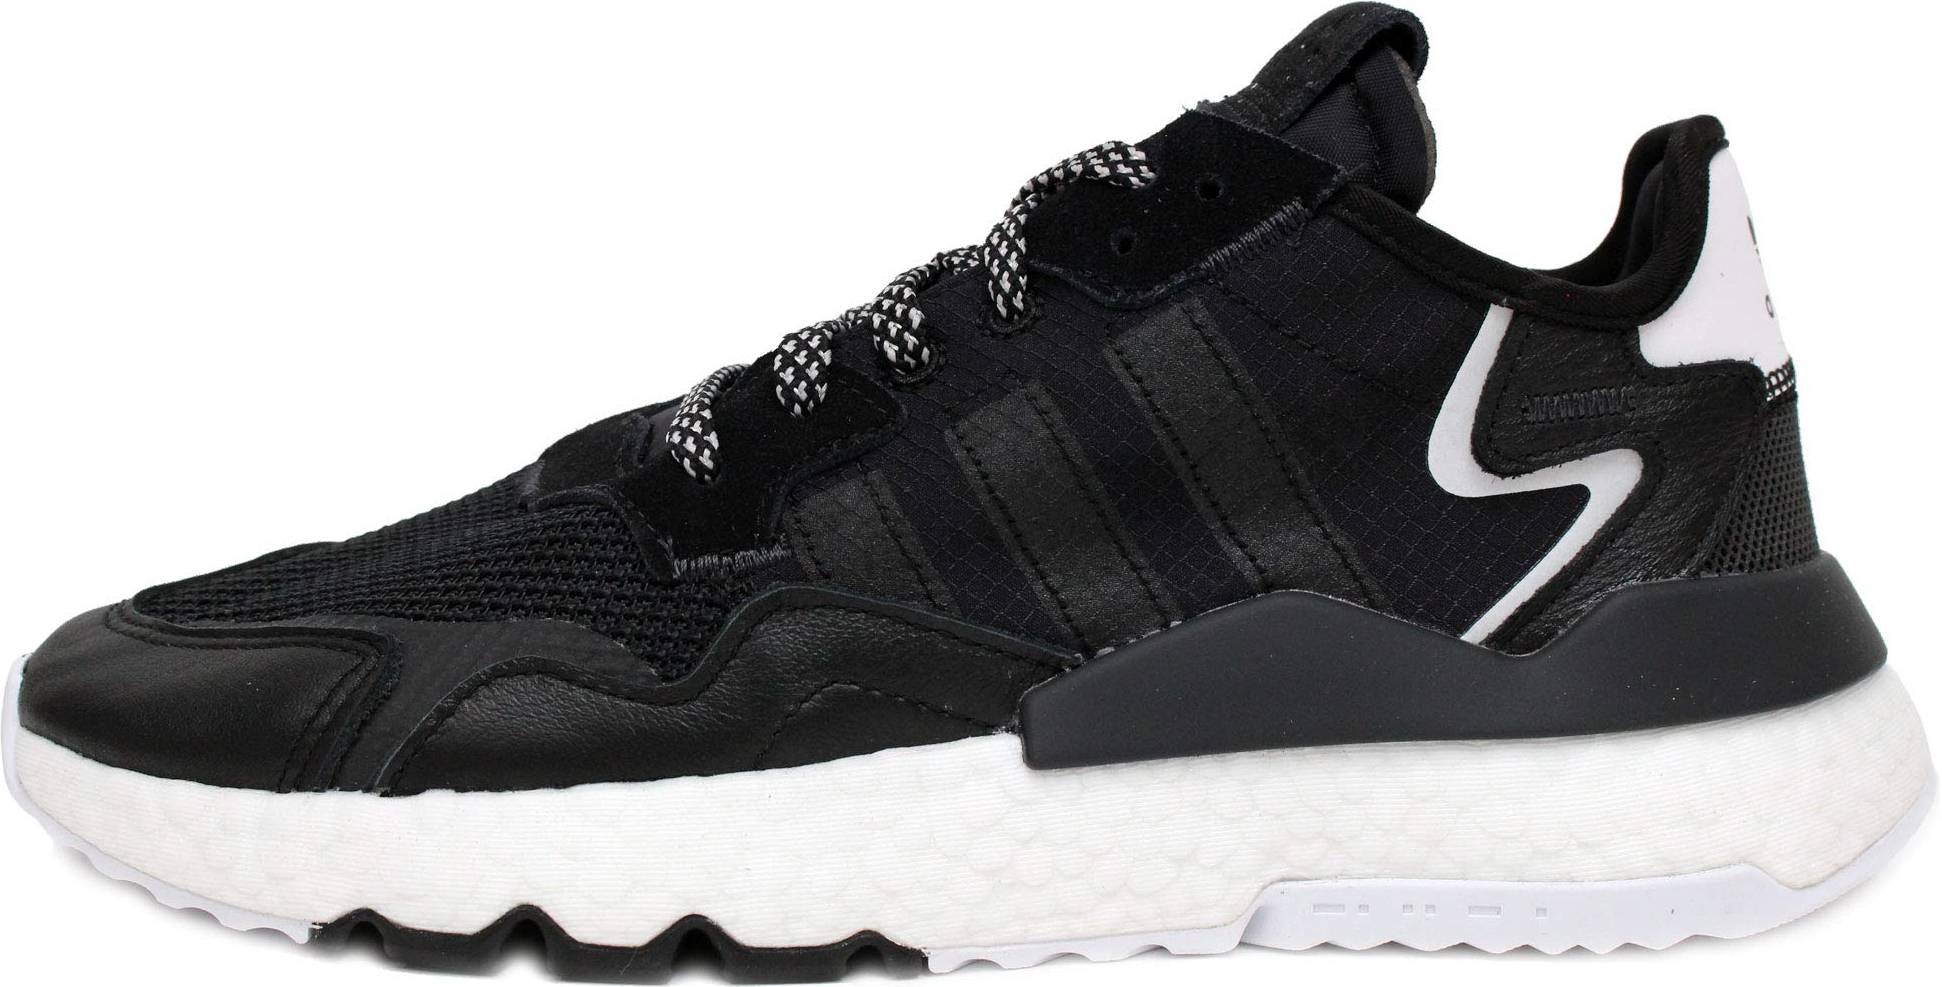 Only $39 + Review of Adidas Nite Jogger 